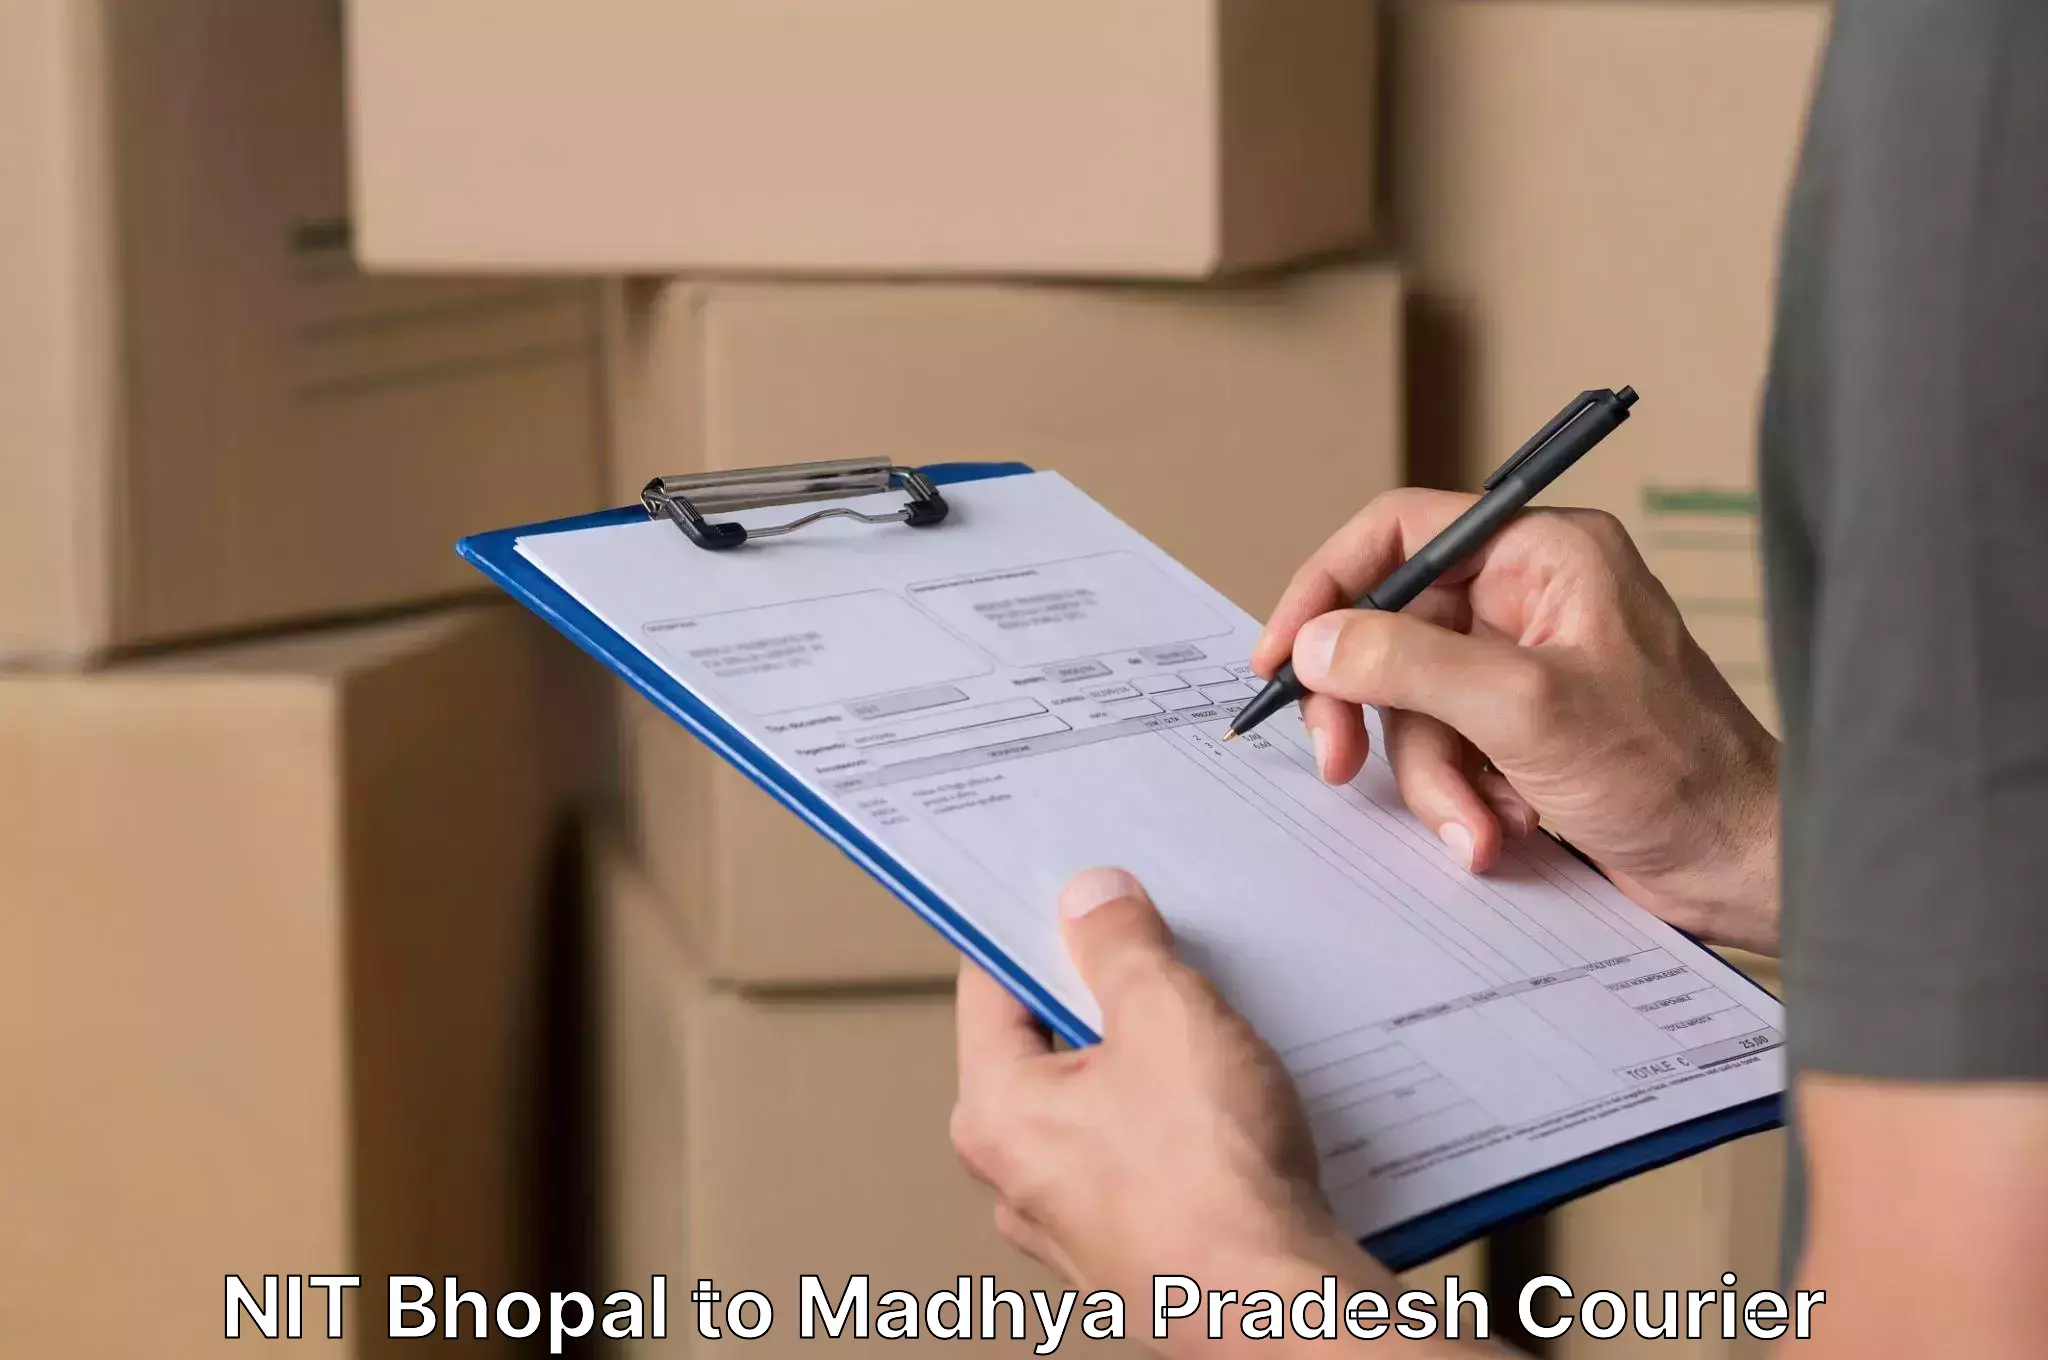 Home goods moving company NIT Bhopal to Shahgarh